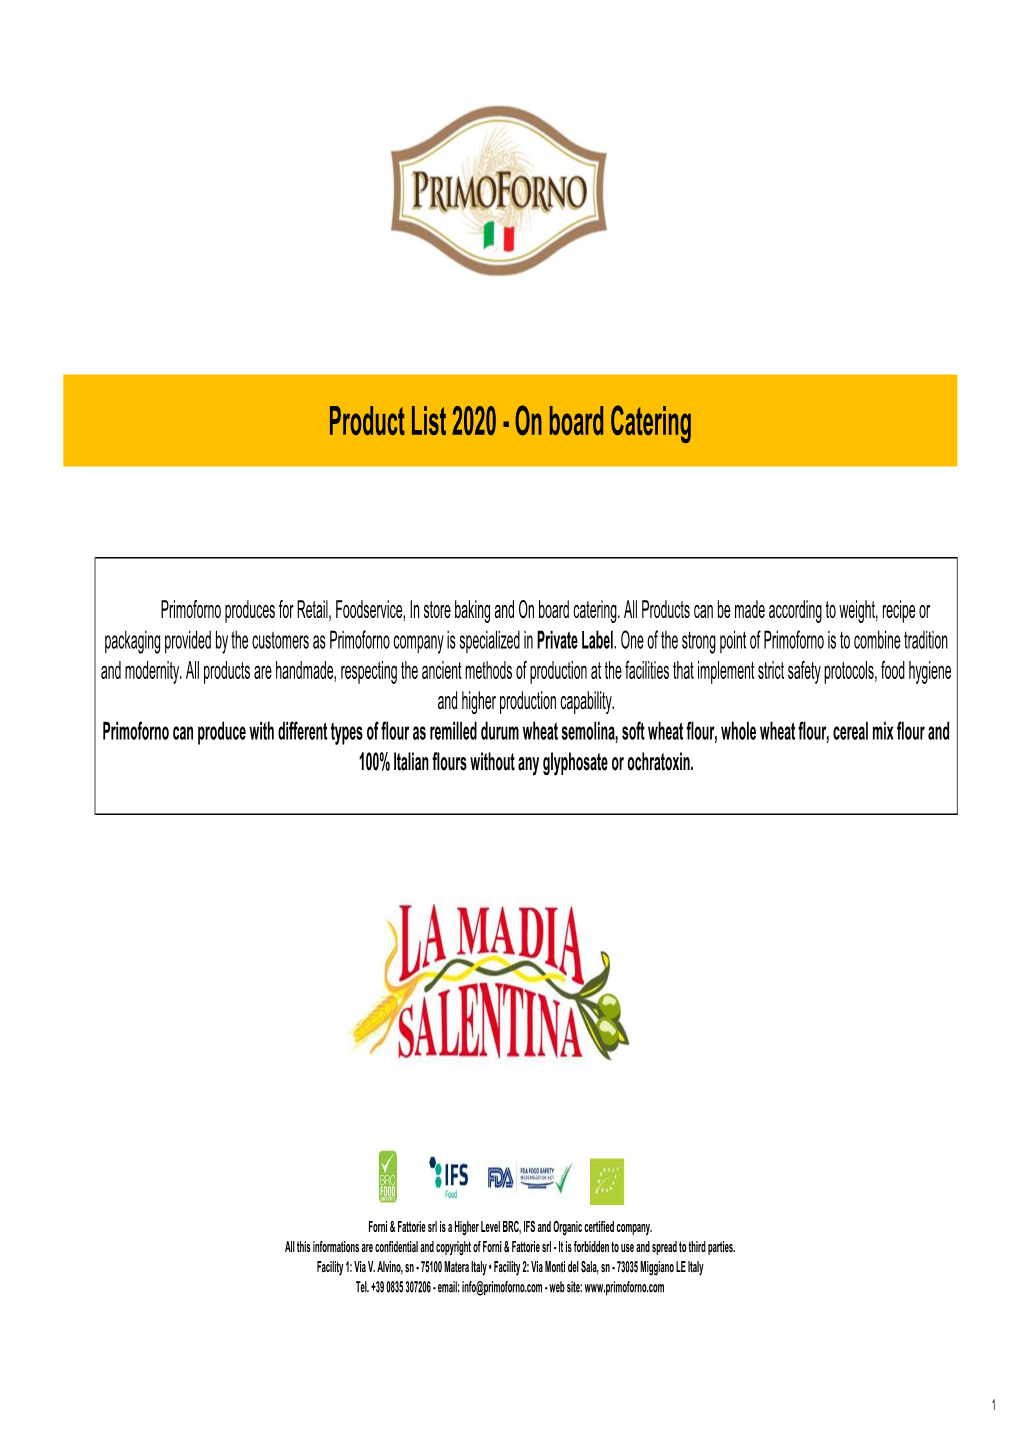 Product List 2020 - on Board Catering